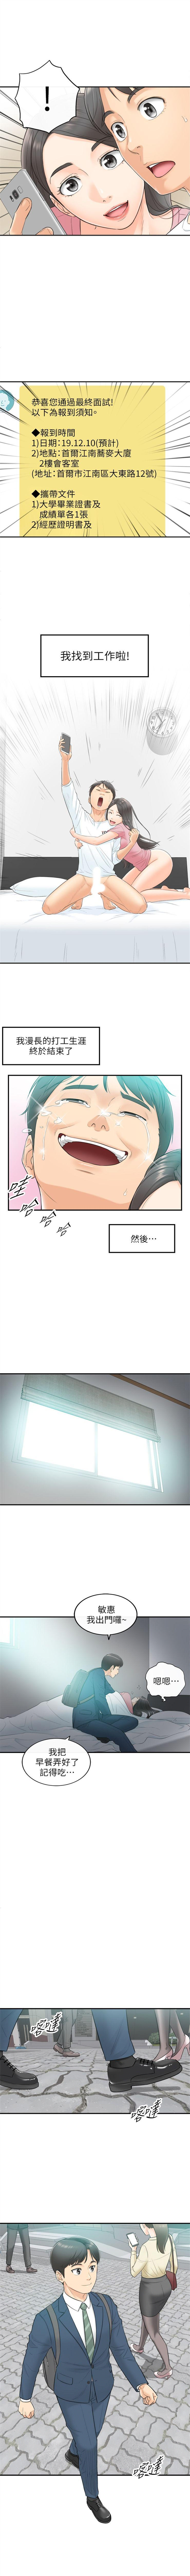 Domination 正妹小主管 1-62 官方中文（連載中） Screaming - Page 8